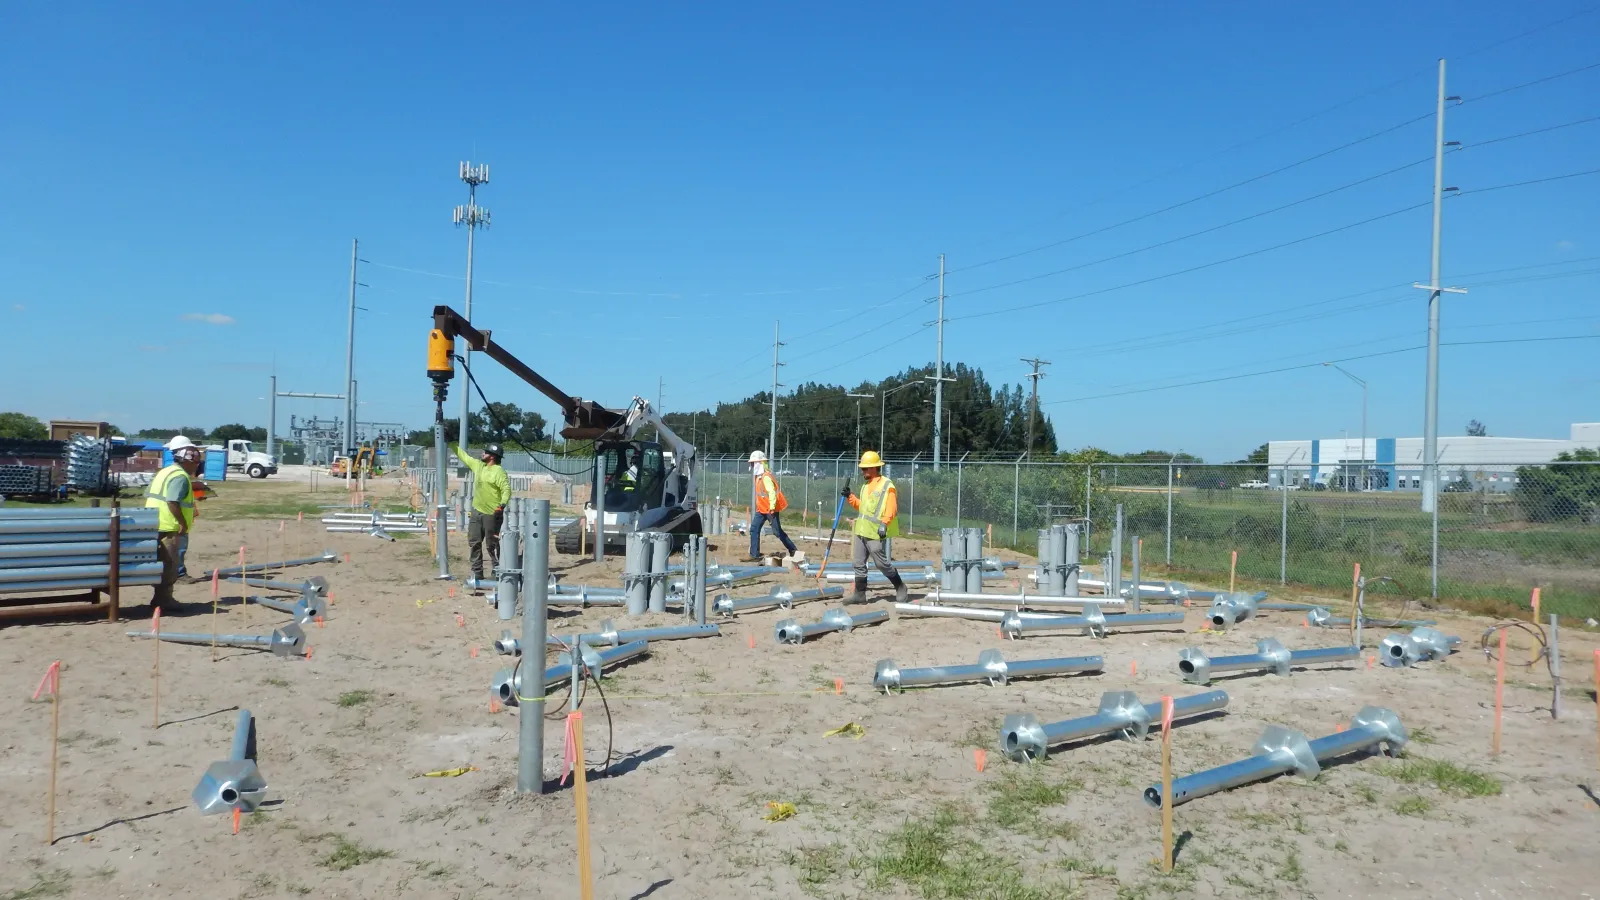 Installing helical piles on a construction site